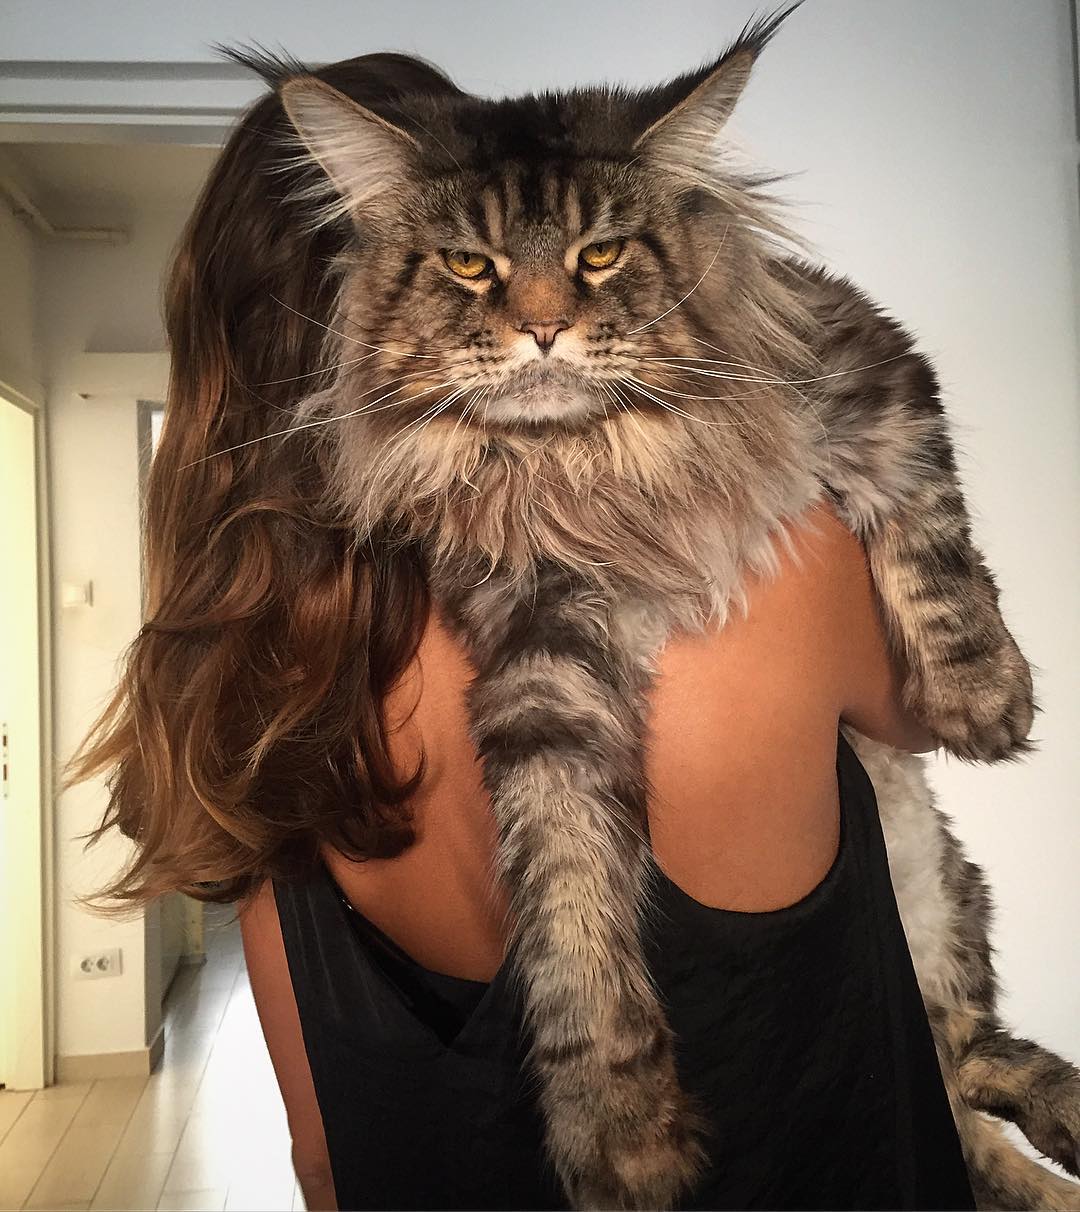 10 Majestic Maine Coon Cats That Will Show You Who’s the Boss Learn Hindi